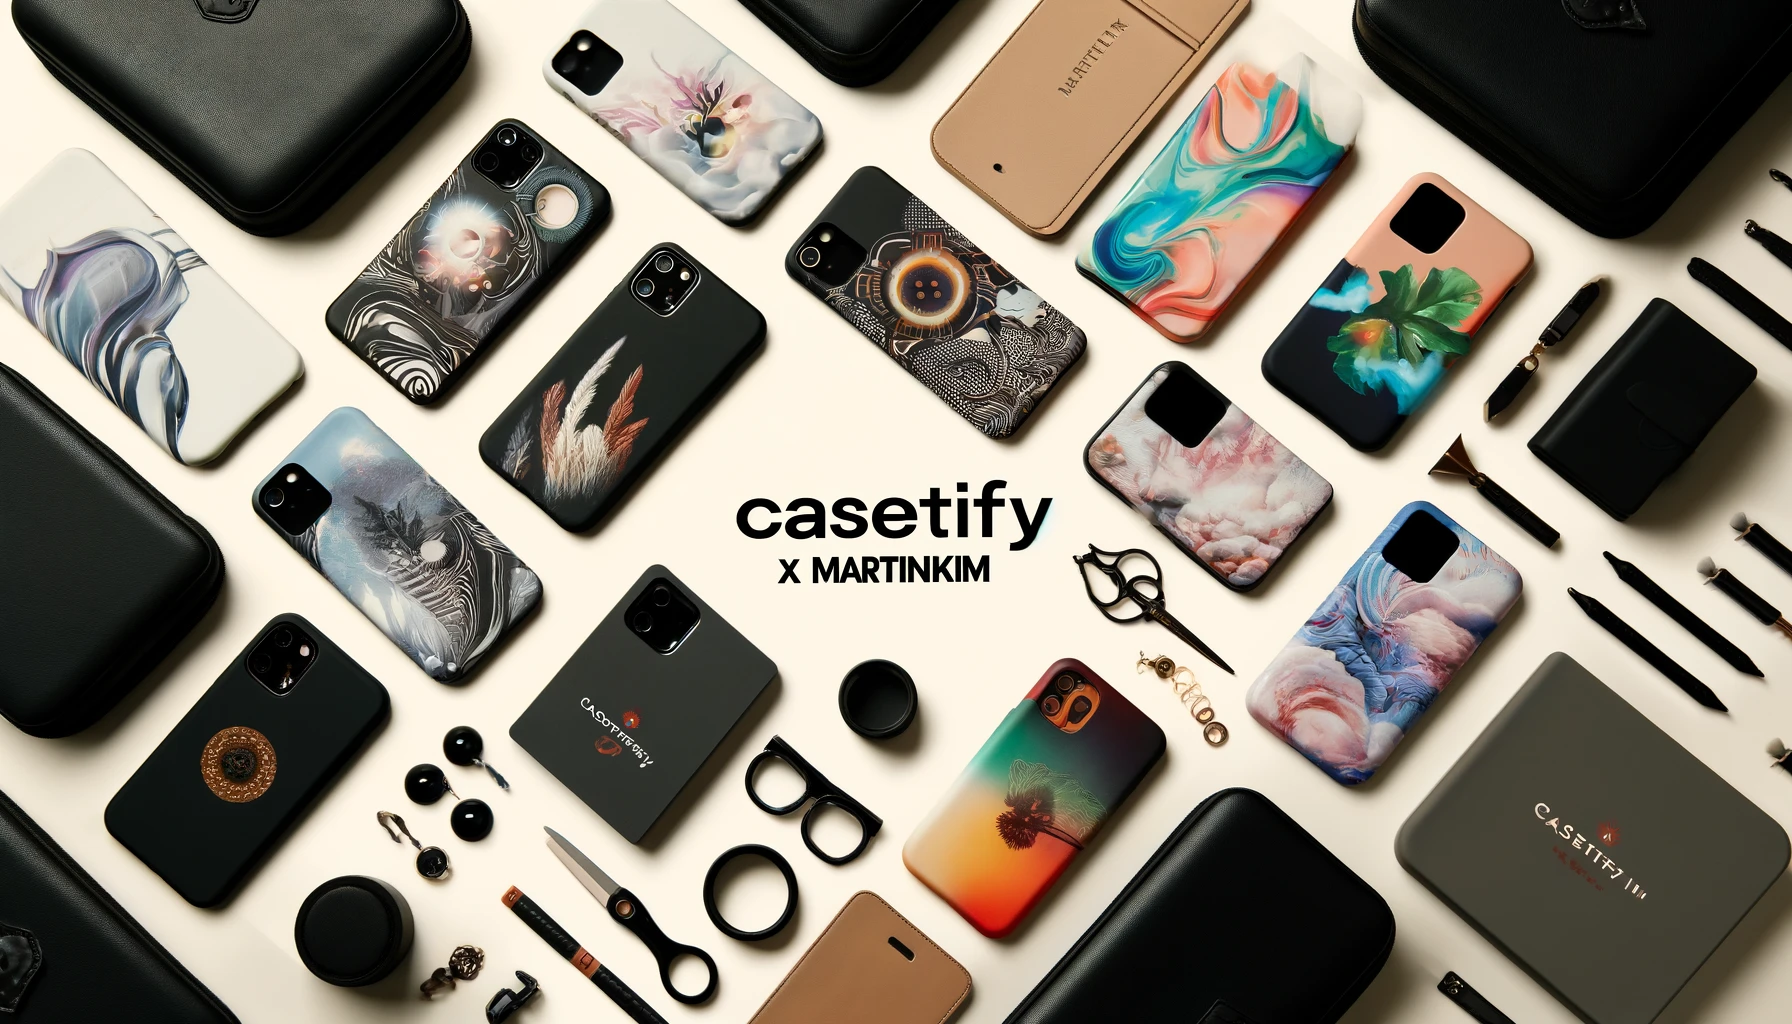 An image showcasing smartphone cases and accessories from the CASETiFY x MartinKim collaboration. Include a variety of cases and accessories with stylish and trendy designs. Include the text 'CASETiFY x MartinKim' prominently in the image.